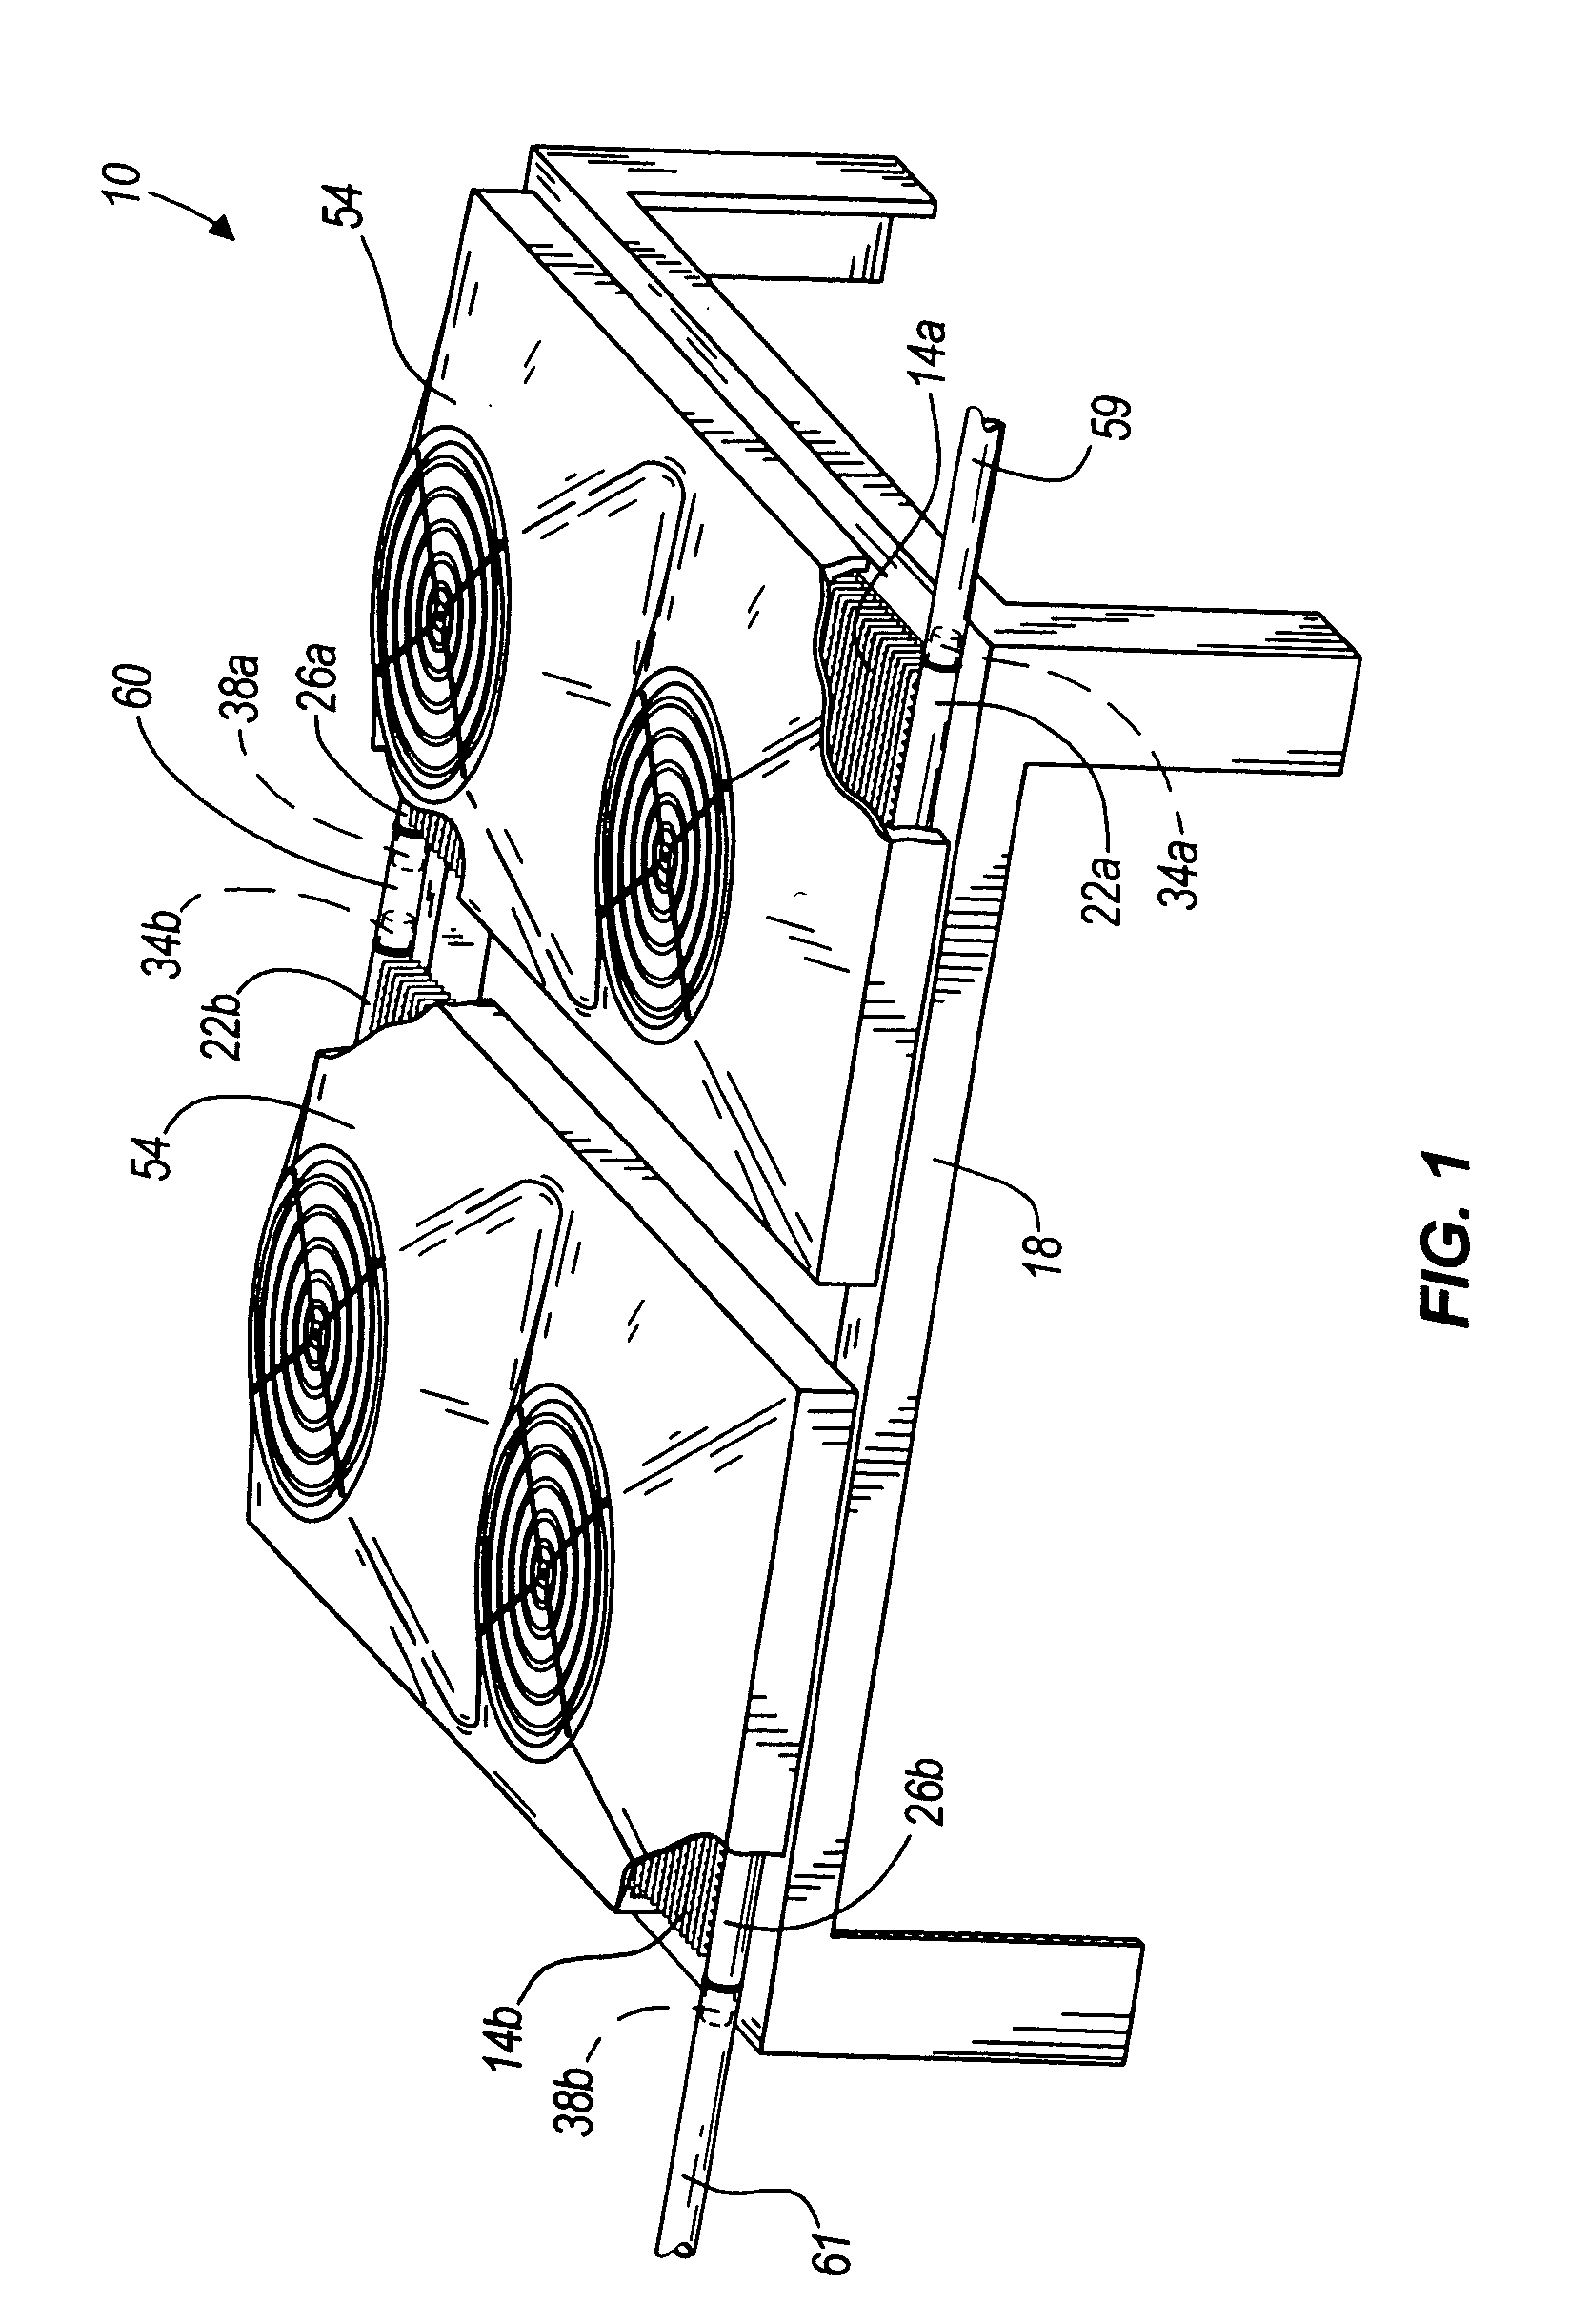 Microchannel condenser assembly